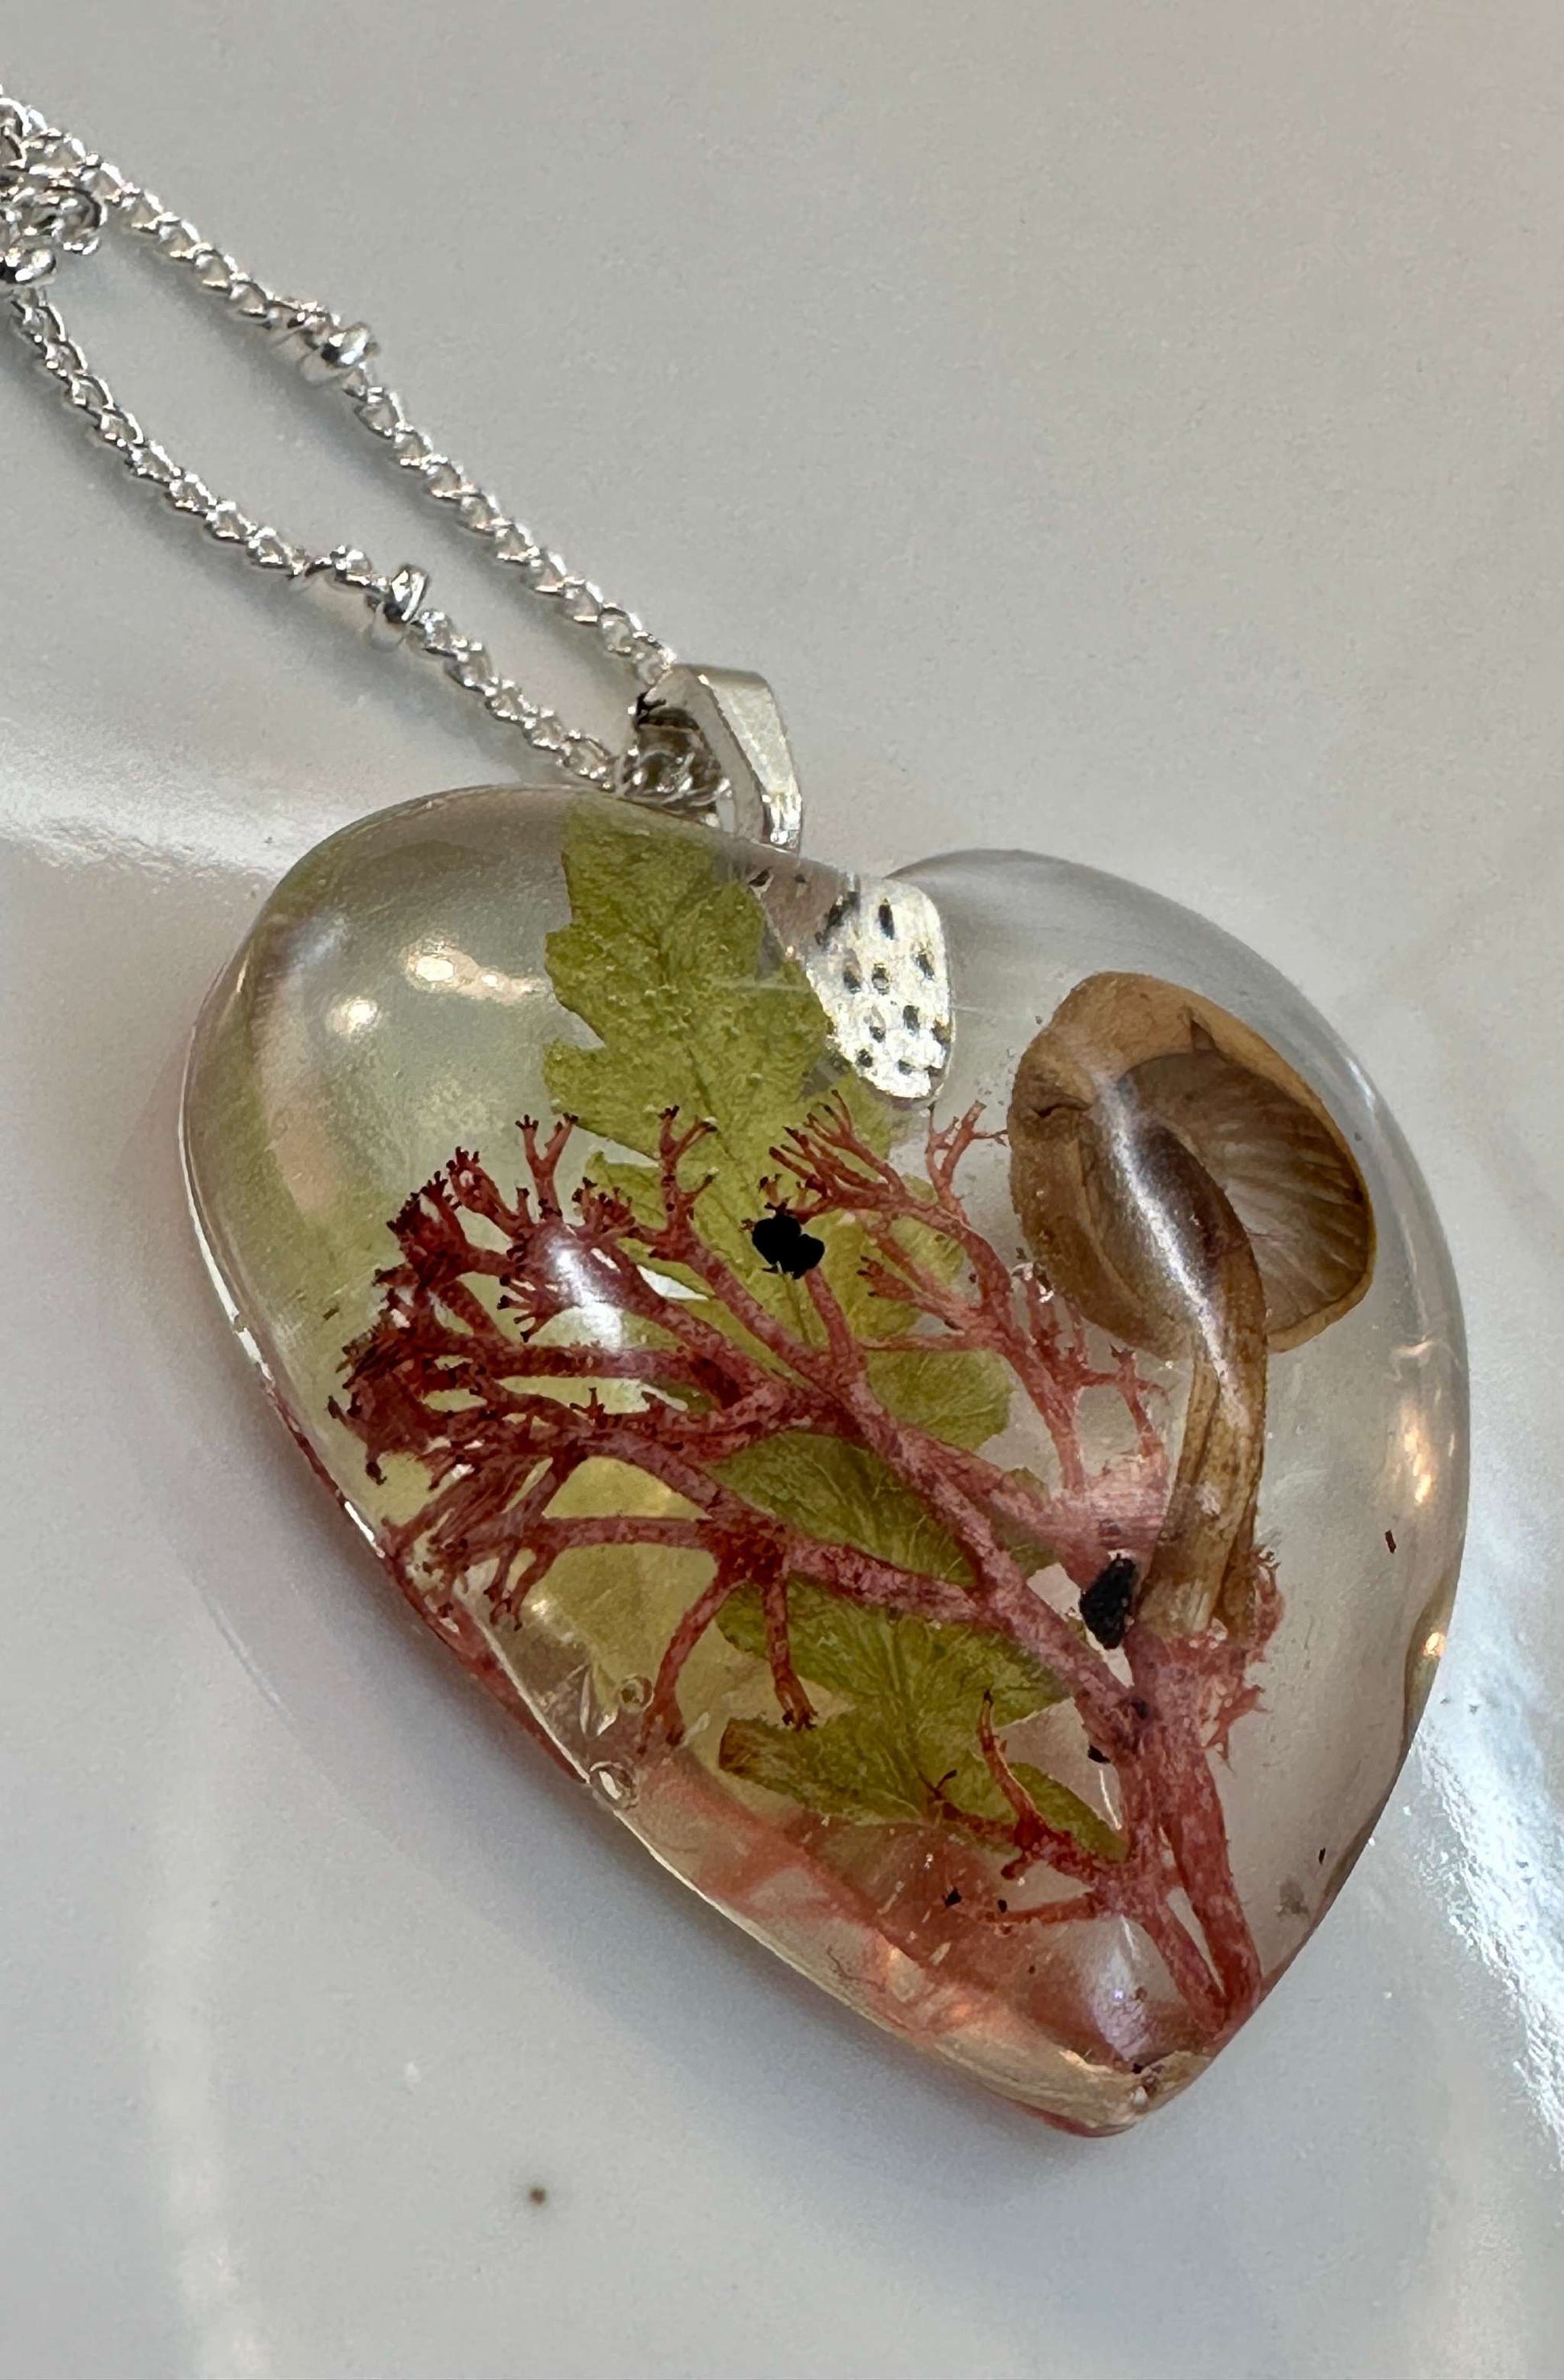 Shrooms & Ferns Pendant Inspired by Mother Nature- Handmade with Resin